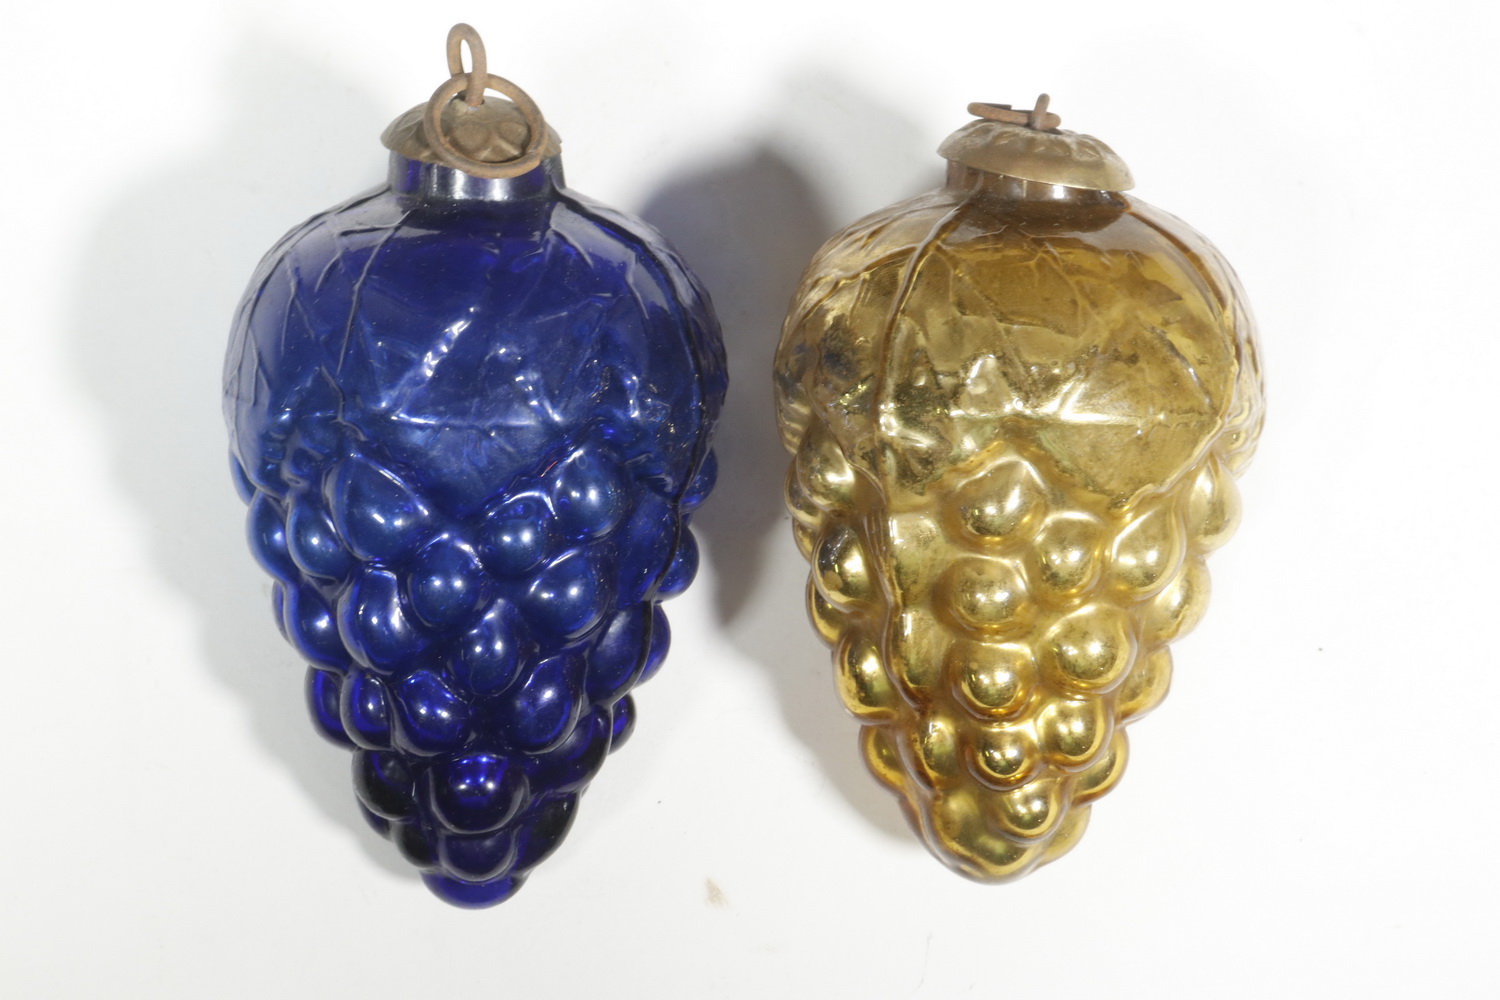  2 BLOWN GLASS HOLIDAY ORNAMENTS 2b3857